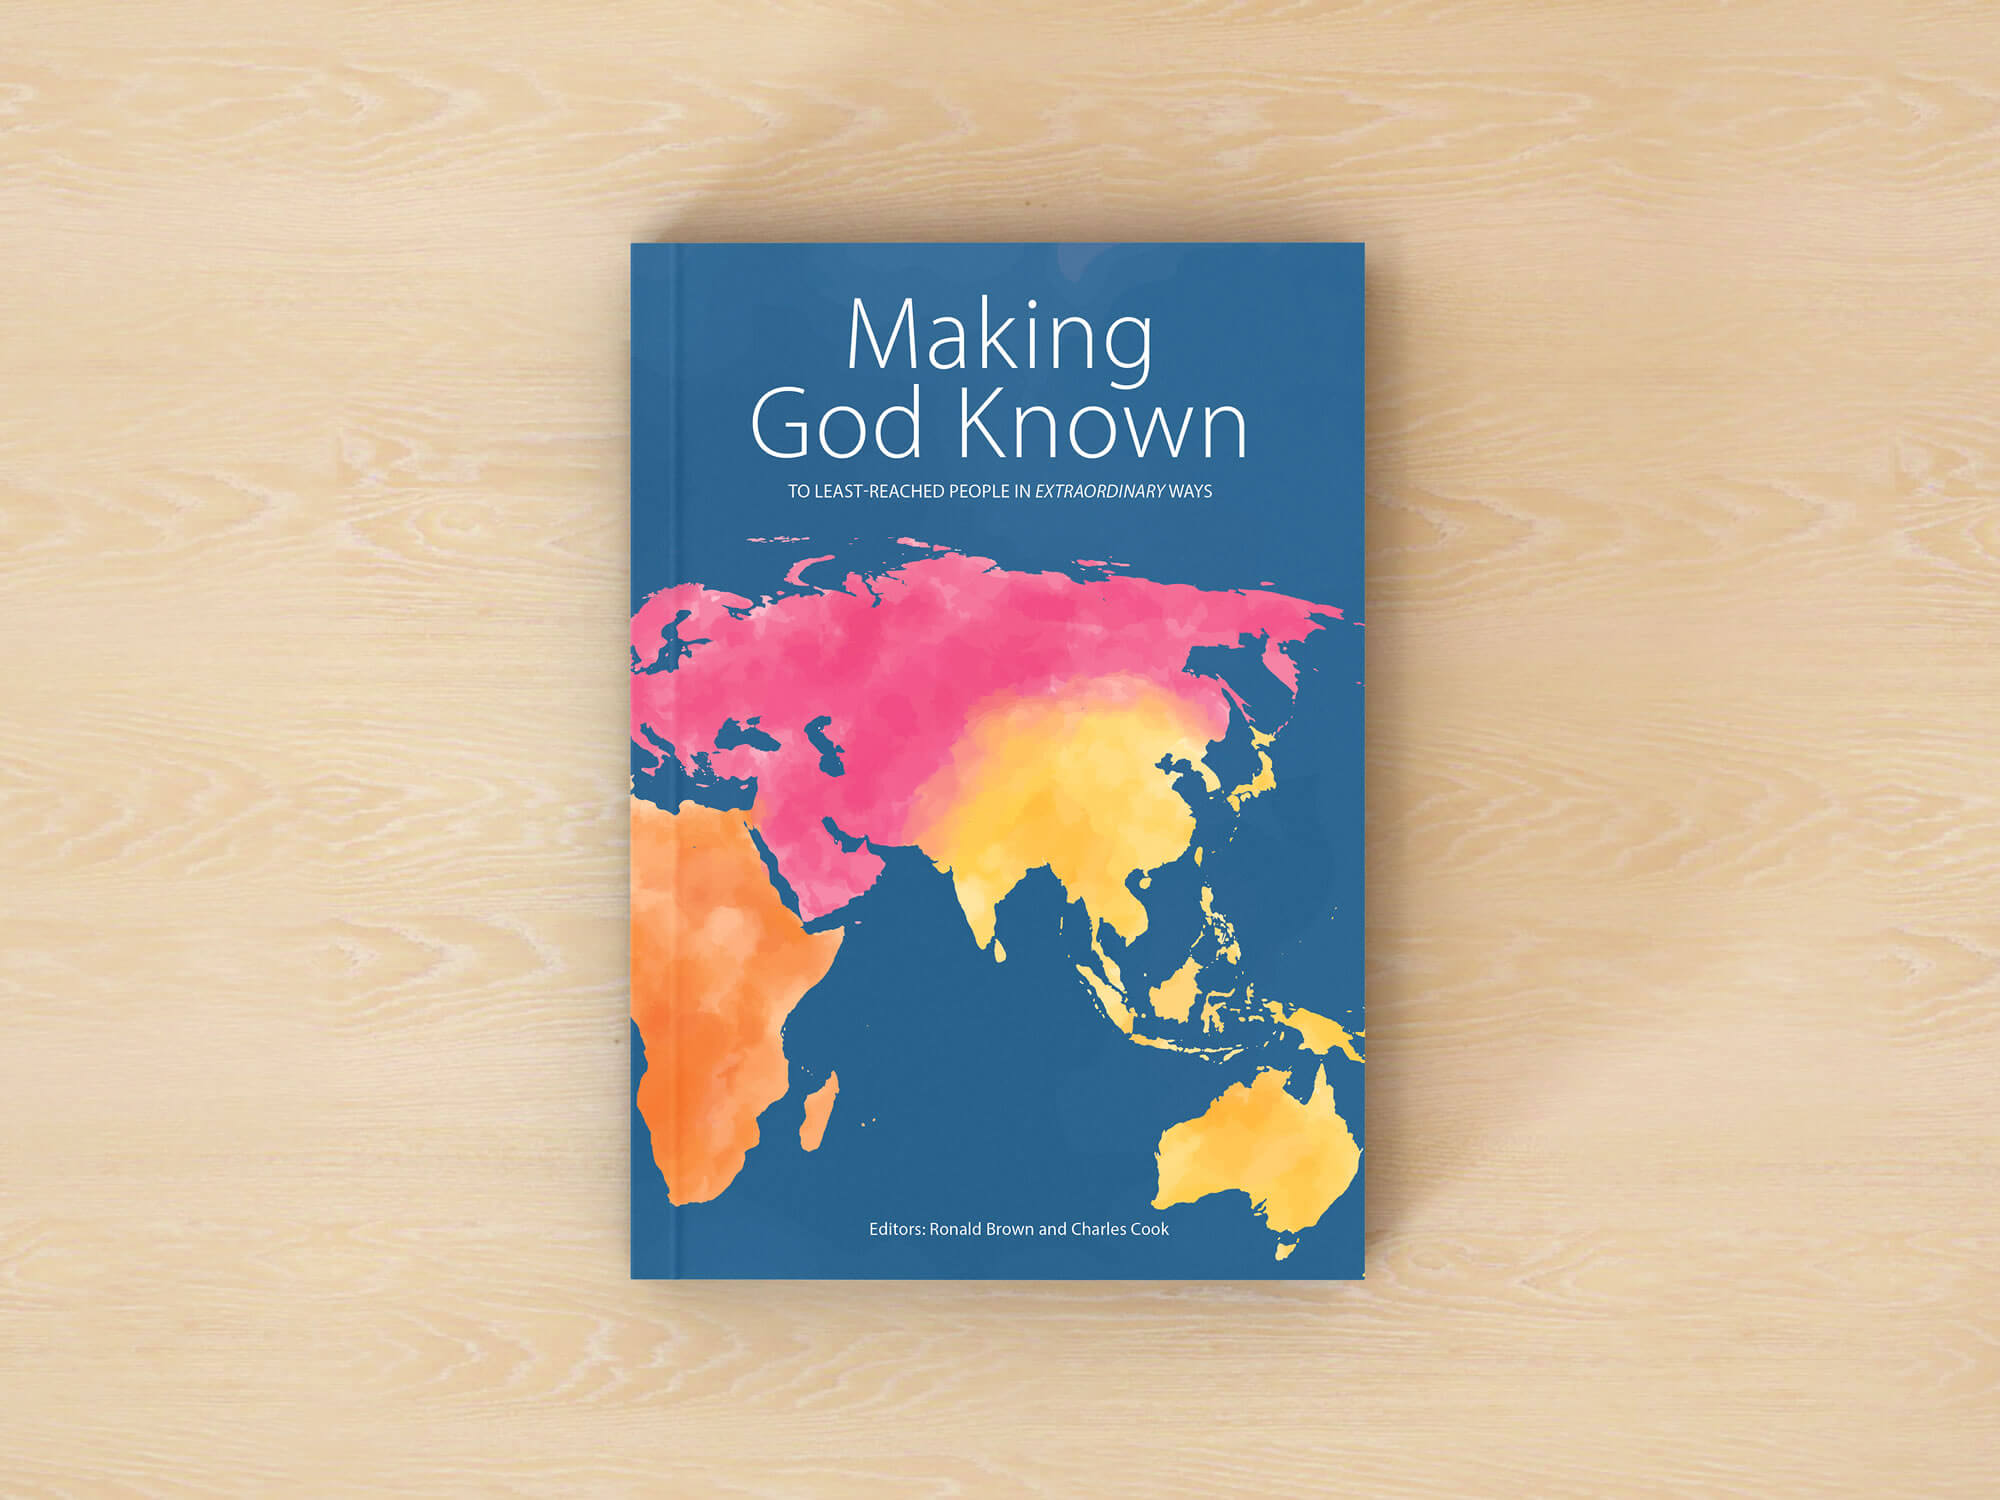 The book "Making God Known" on a table.